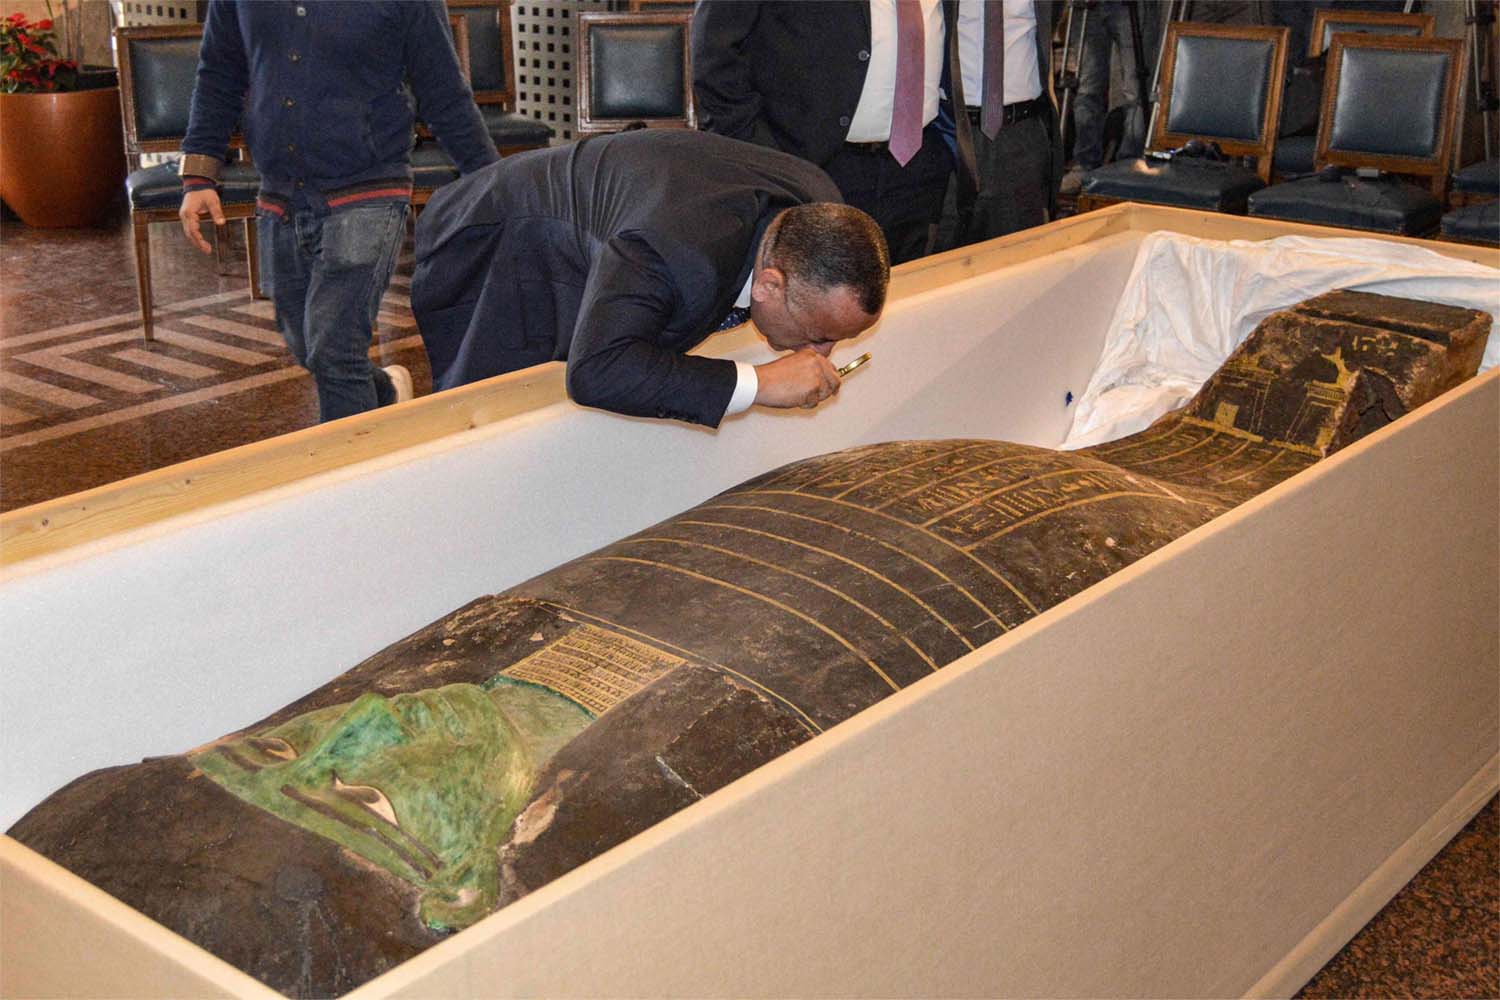 The sarcophagus is almost 3 meters tall 